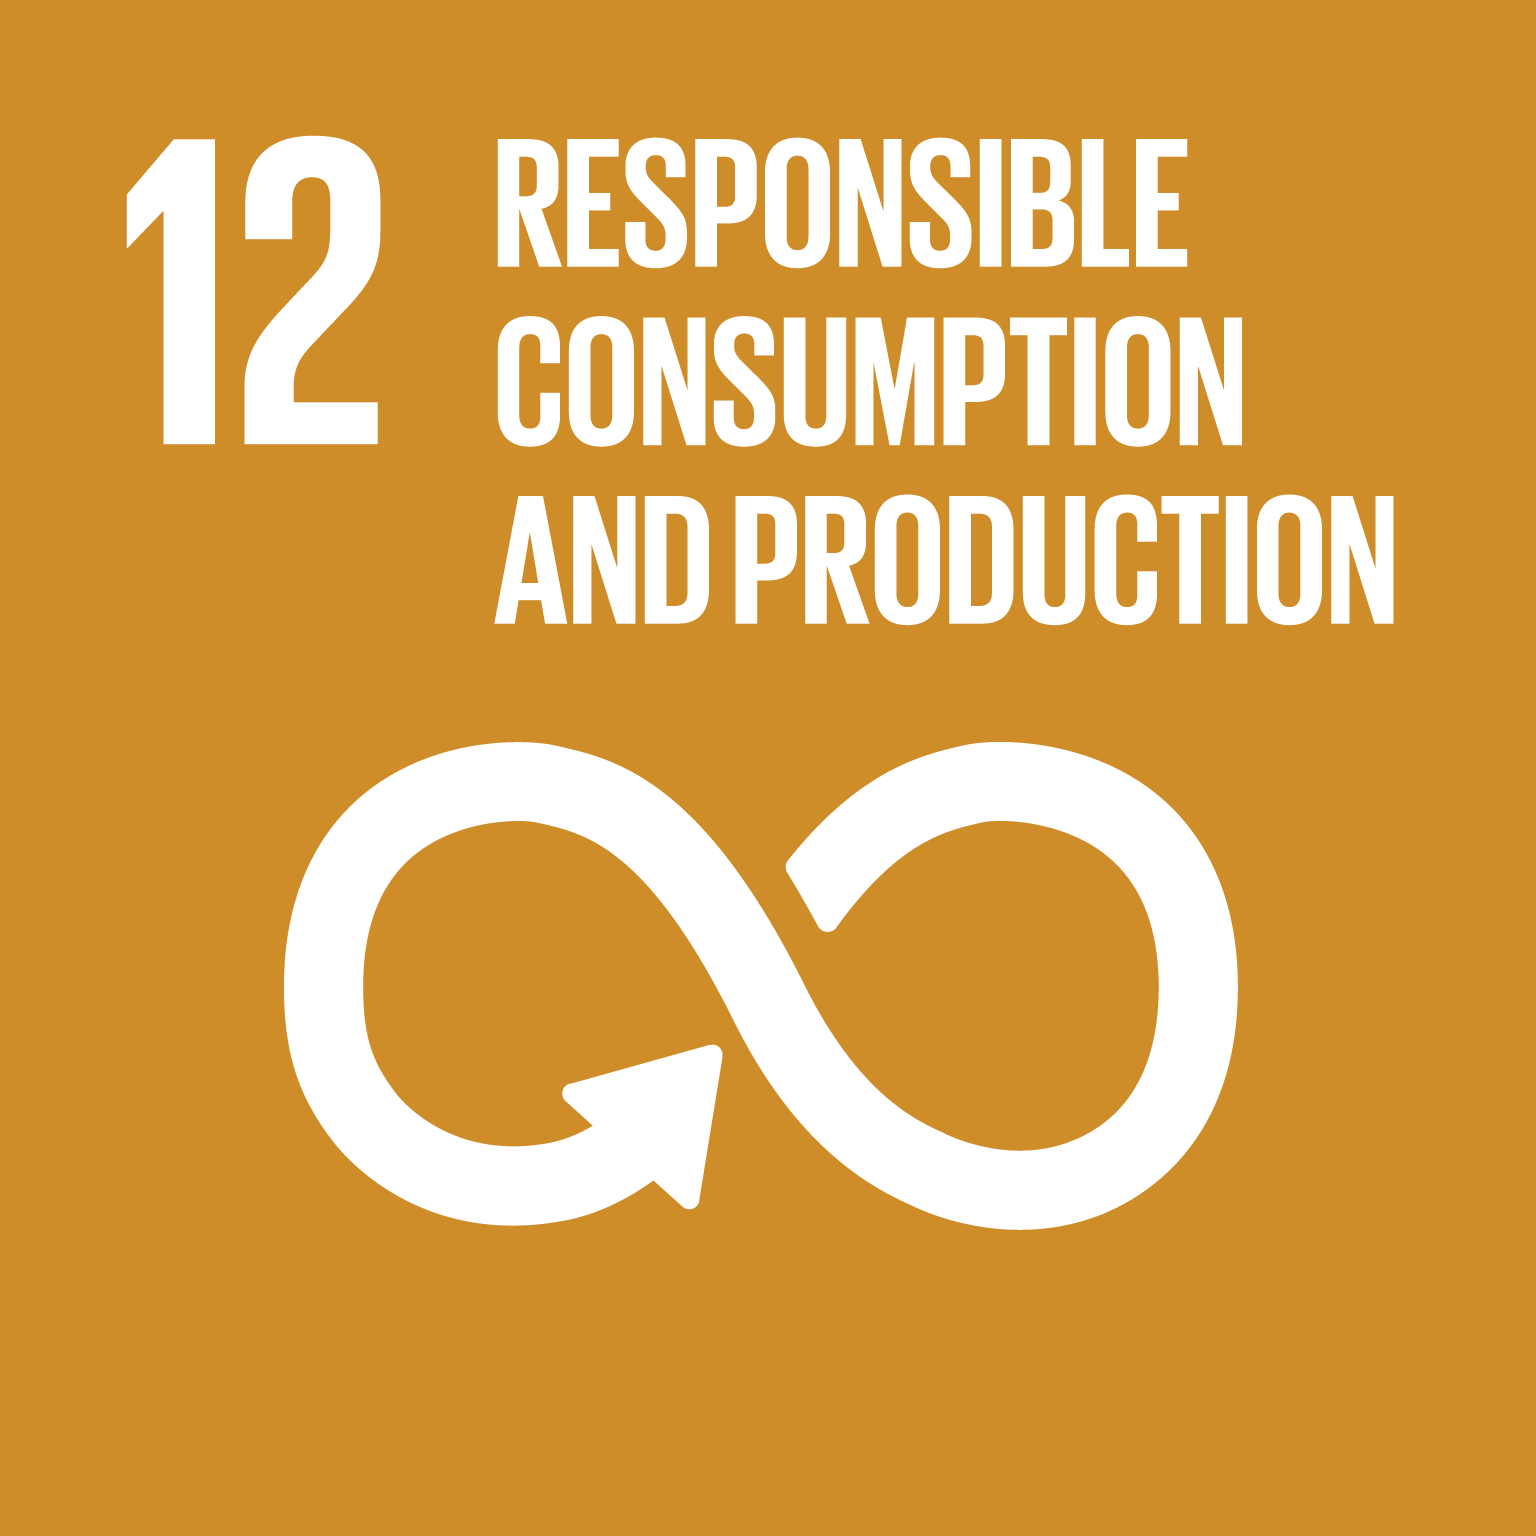 sustainable development goal 12 icon responsible consumption and production